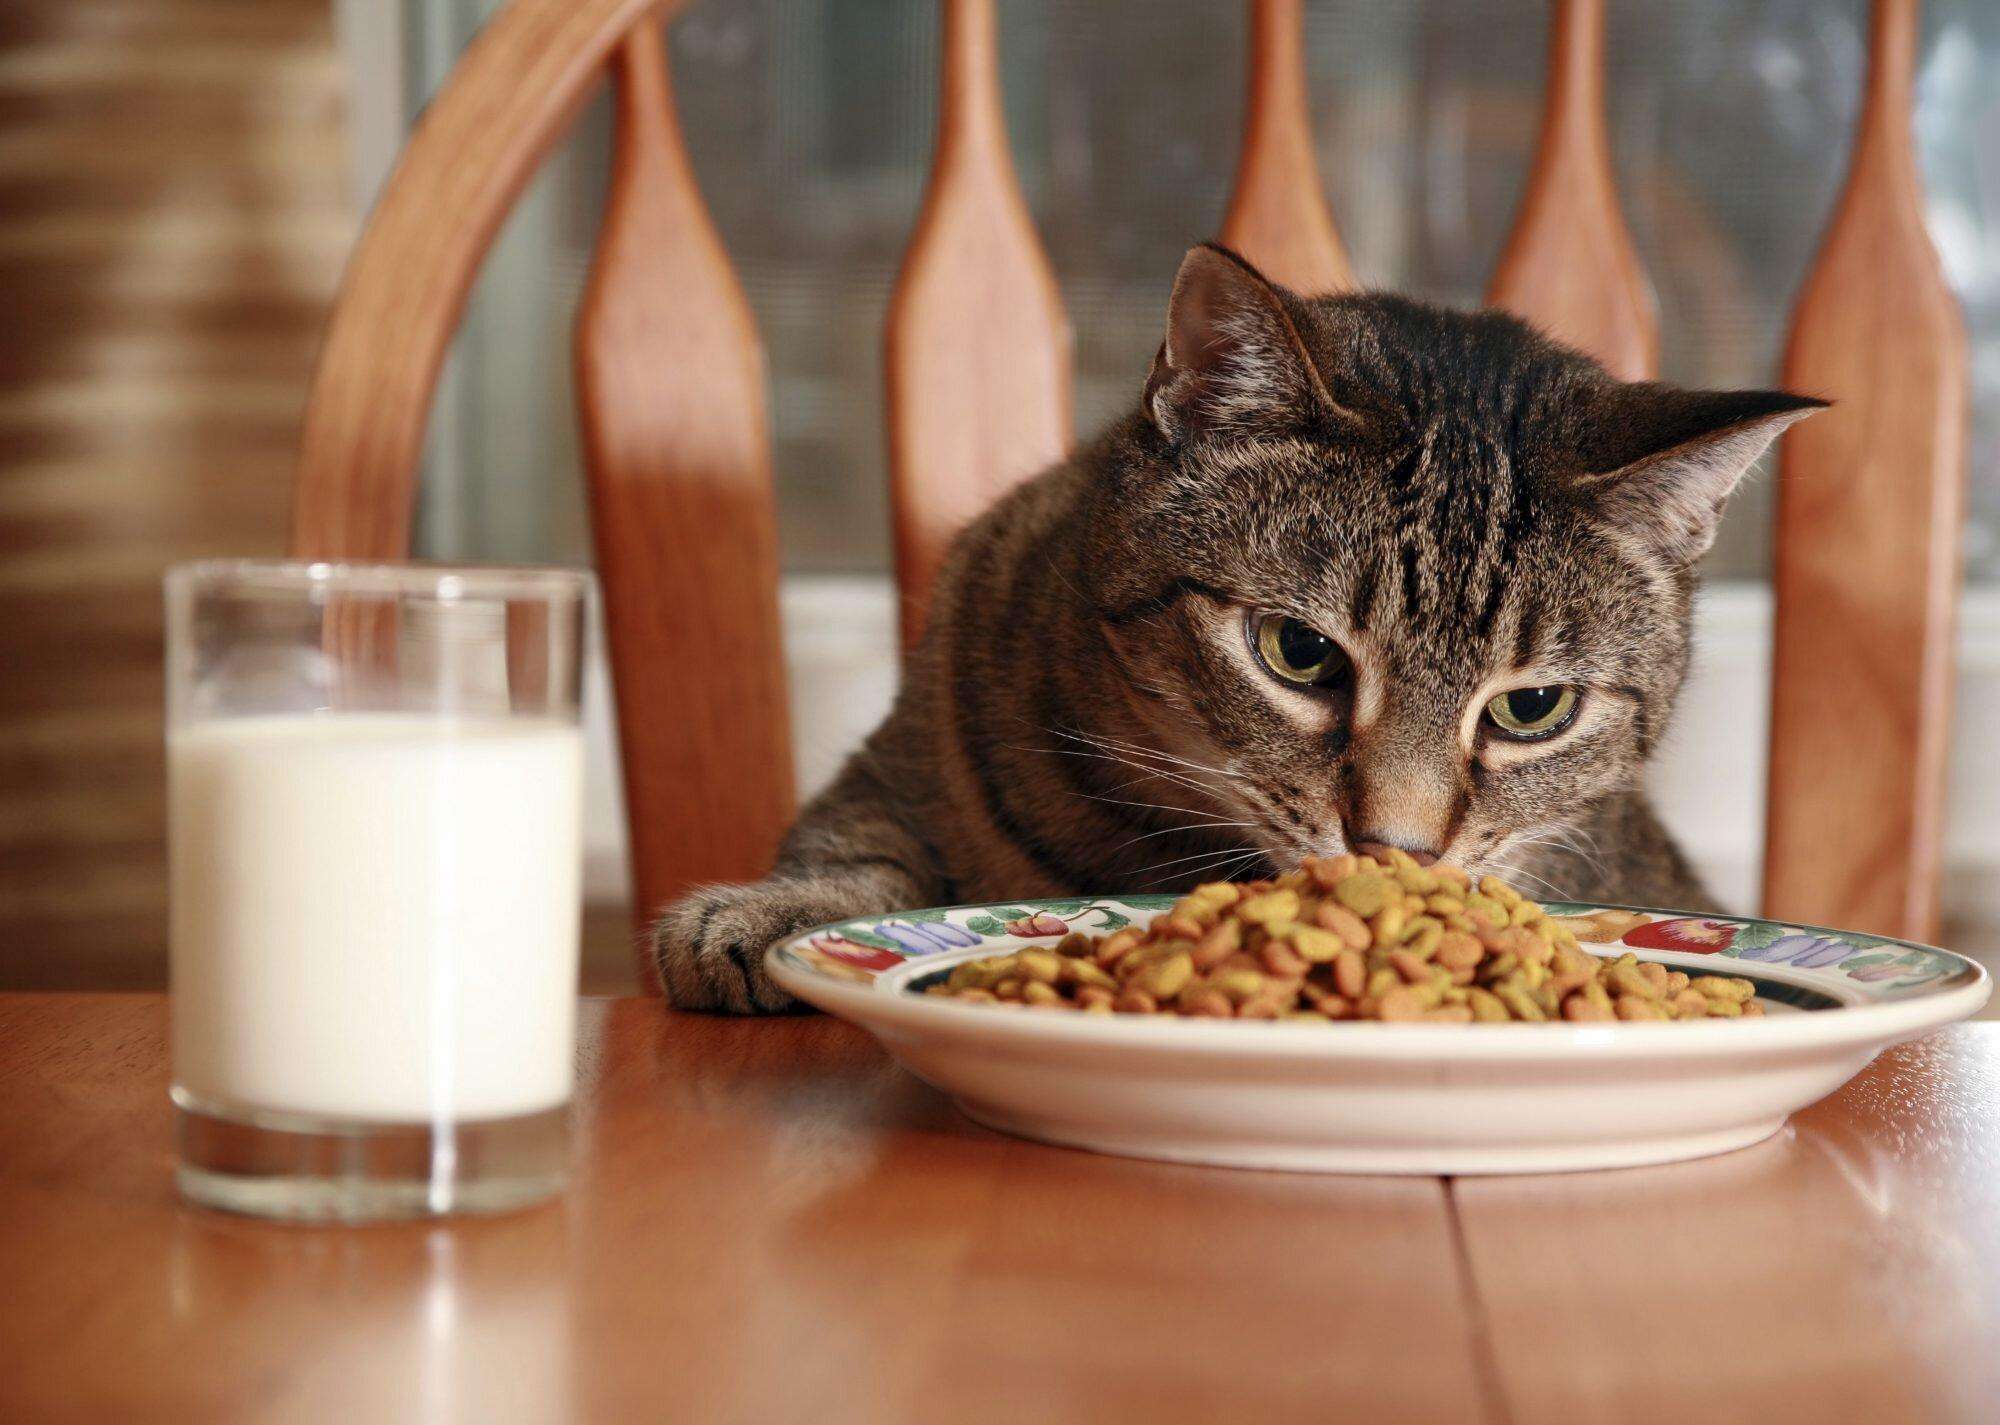 Which Human Food Can Cats Eat?